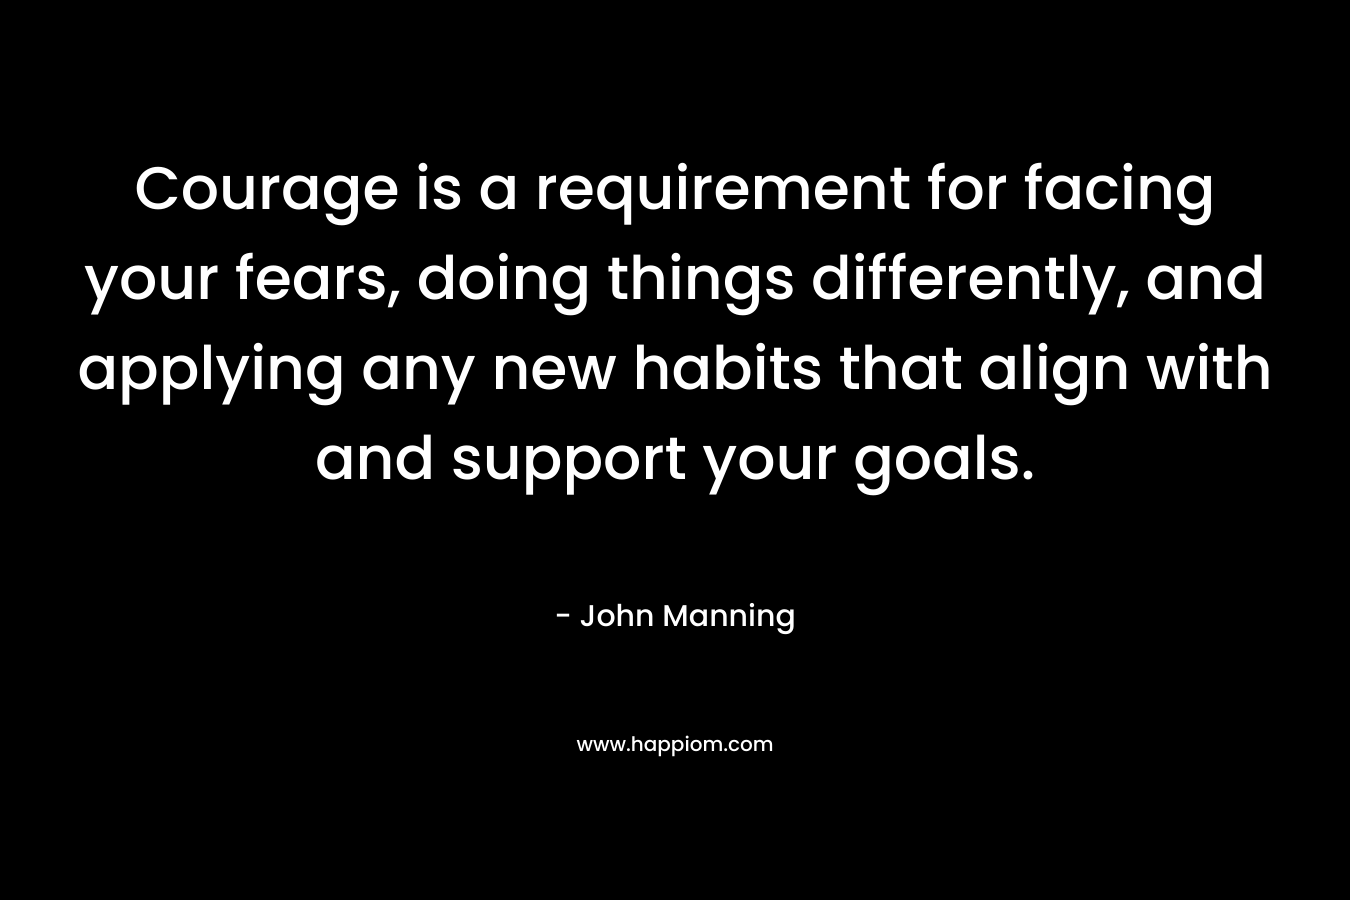 Courage is a requirement for facing your fears, doing things differently, and applying any new habits that align with and support your goals. – John    Manning